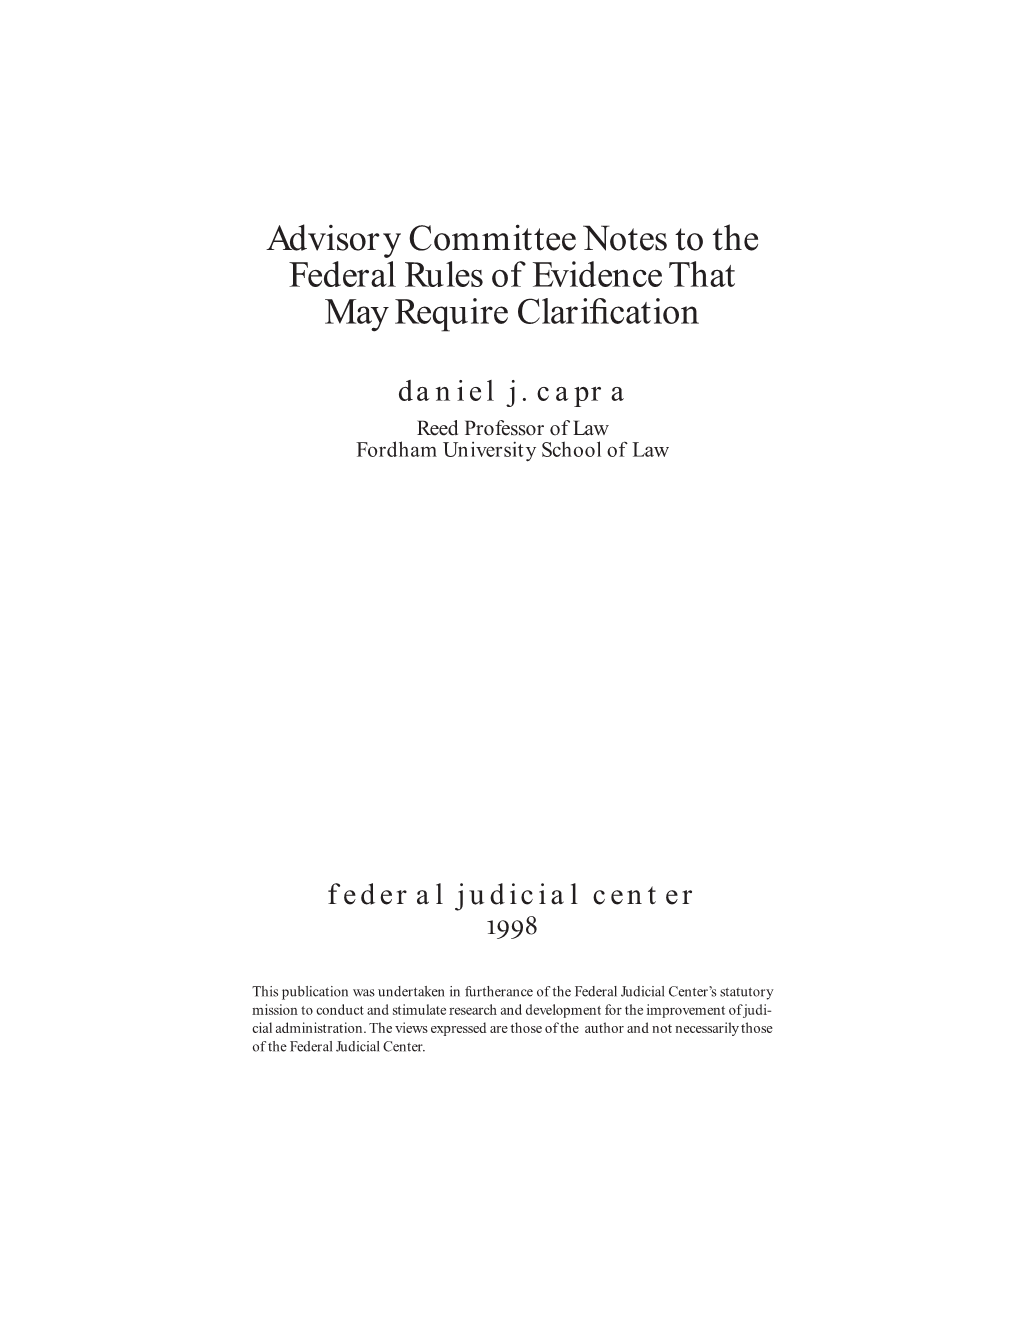 Advisory Committee Notes to the Federal Rules of Evidence That May Require Clariﬁcation